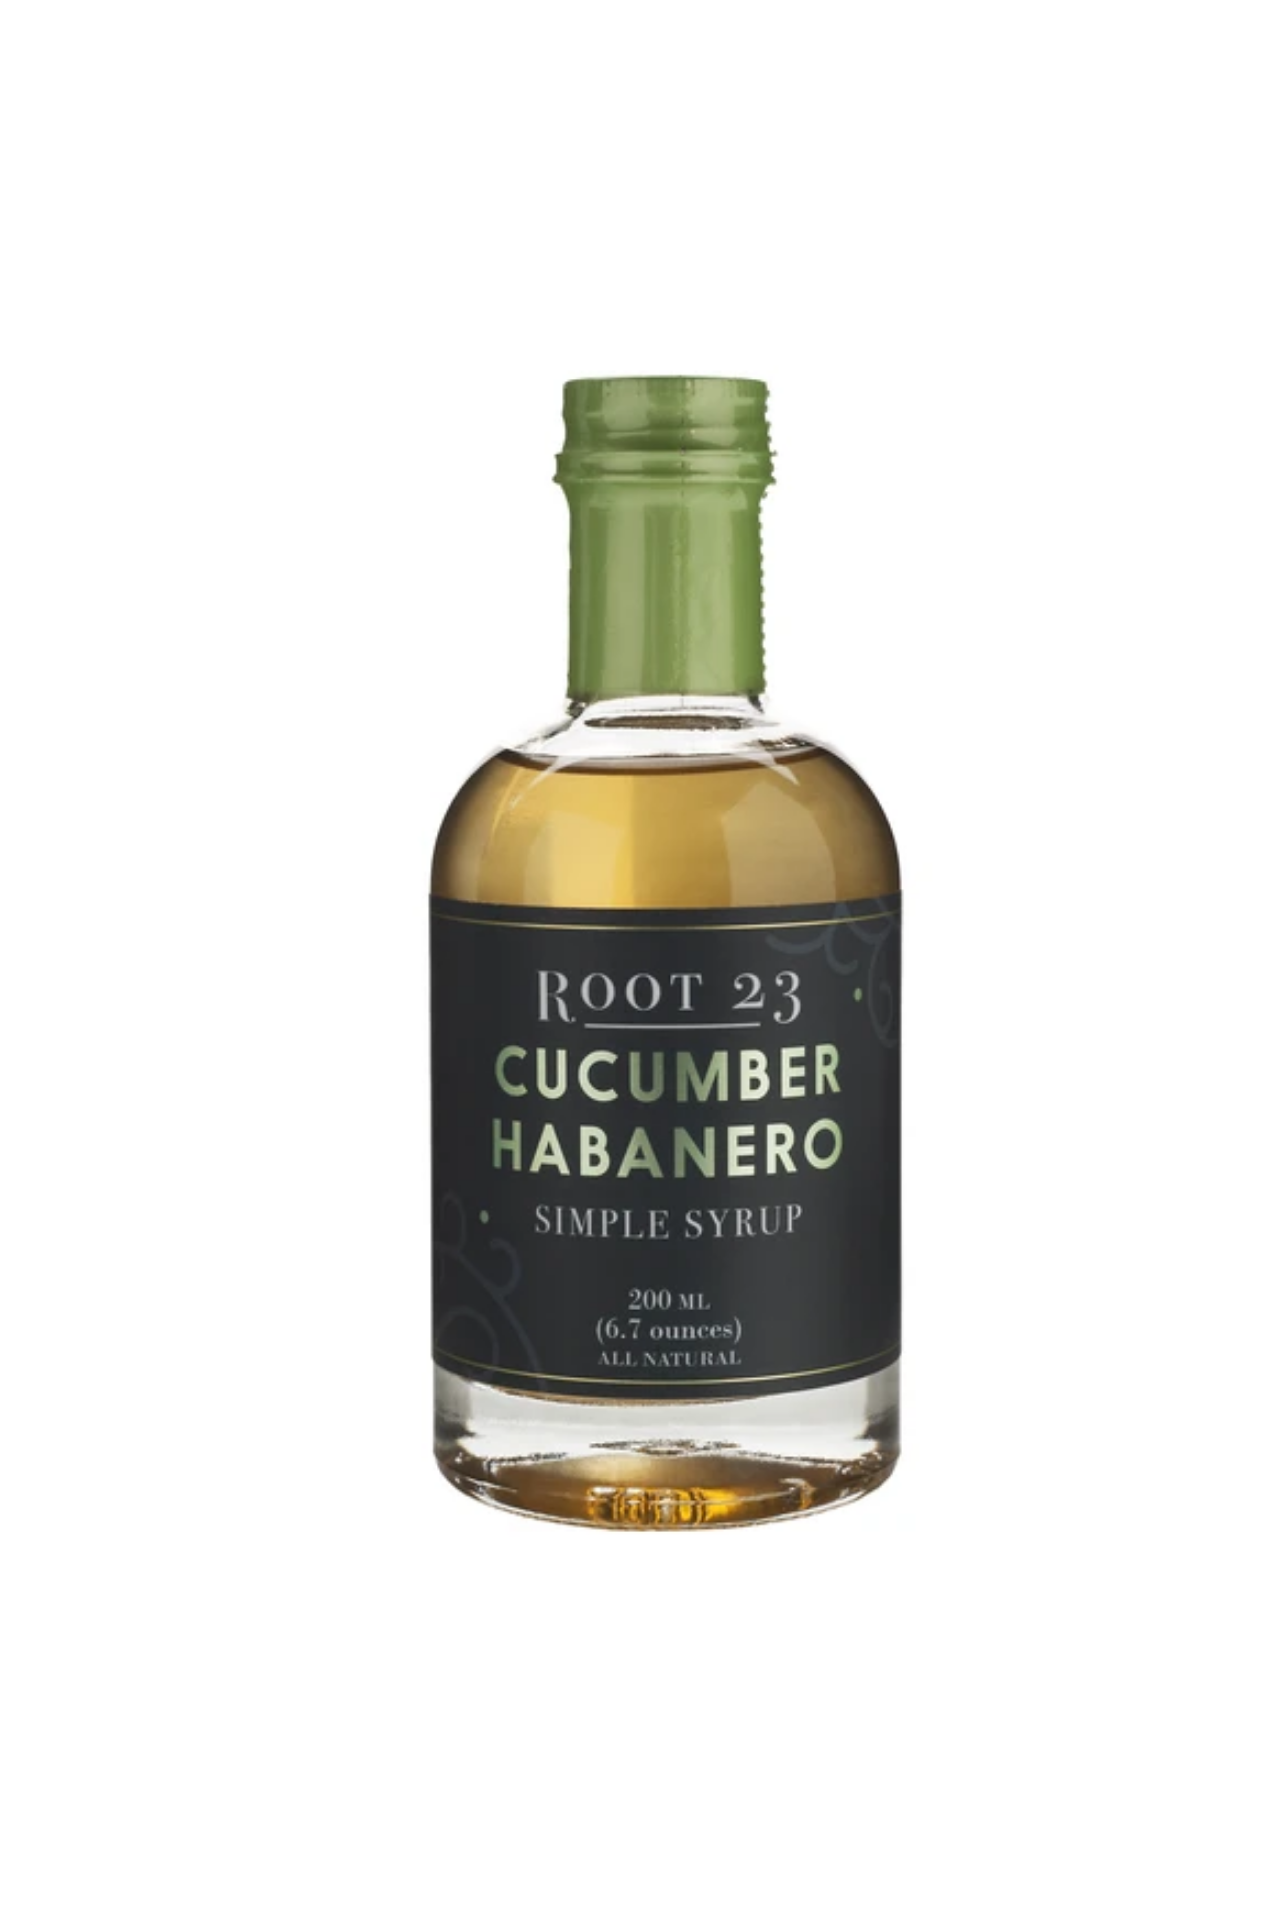 Root 23 Cucumber Habanero Syrup